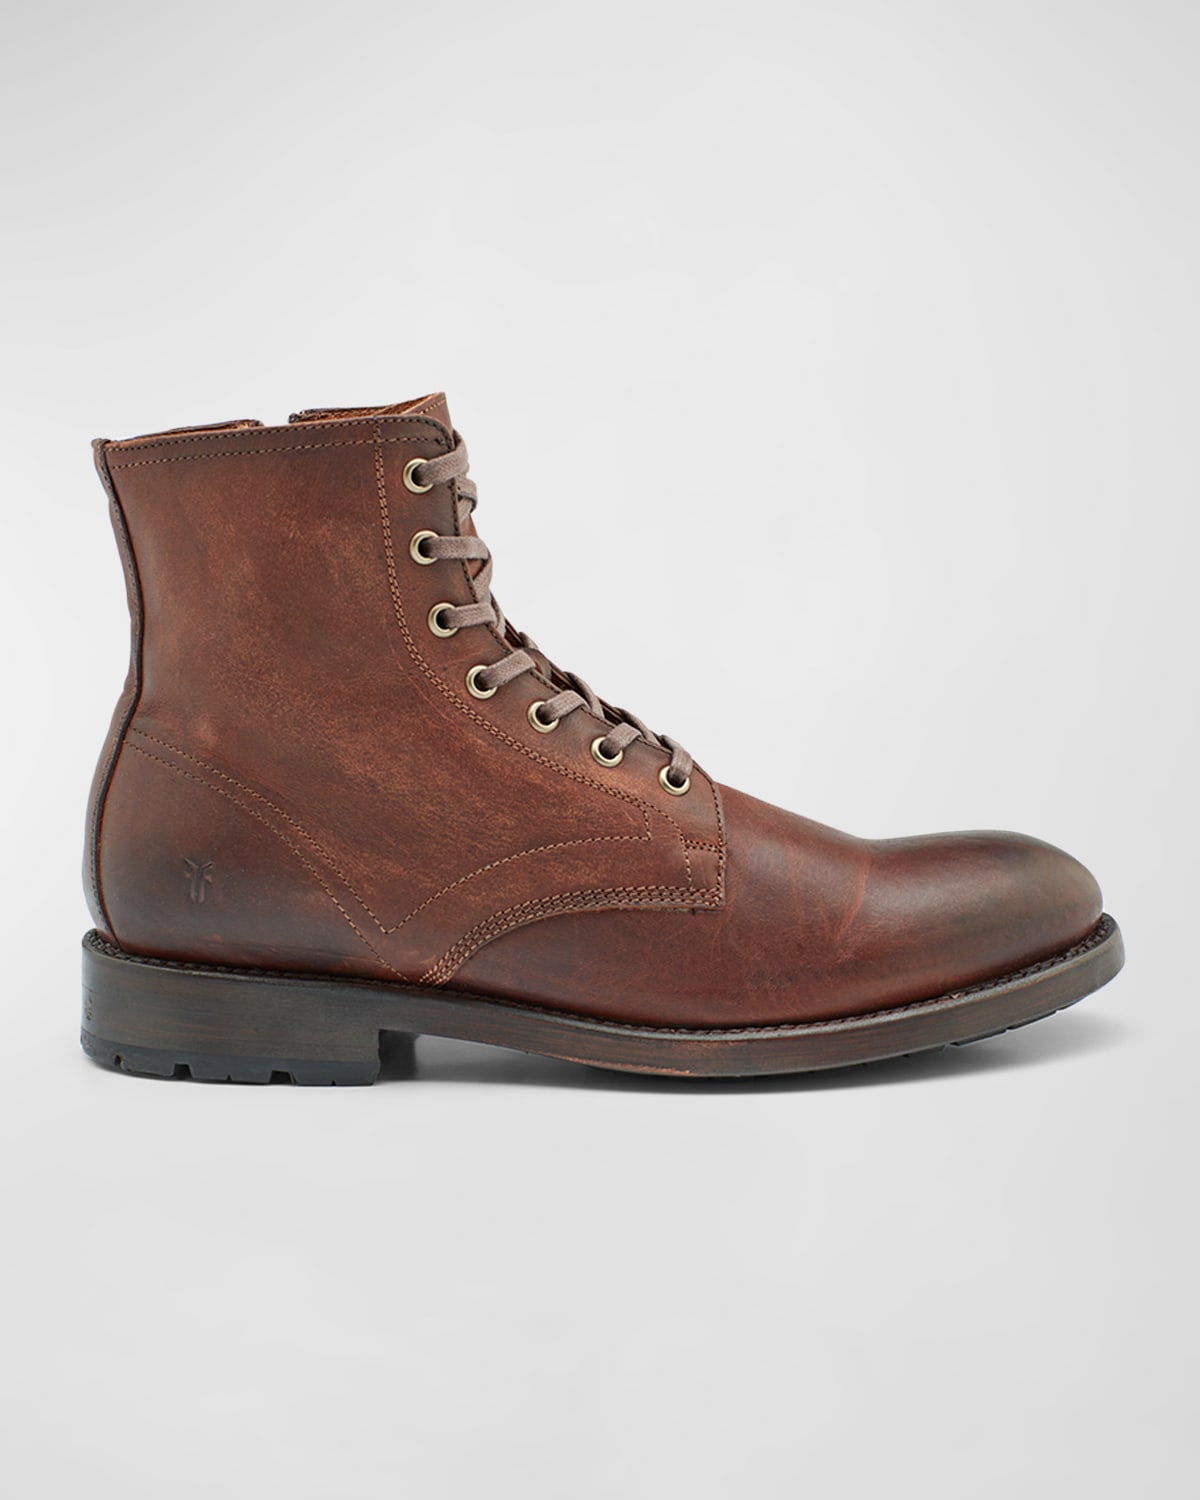 FRYE MEN'S BOWERY LACE-UP LEATHER BOOTS